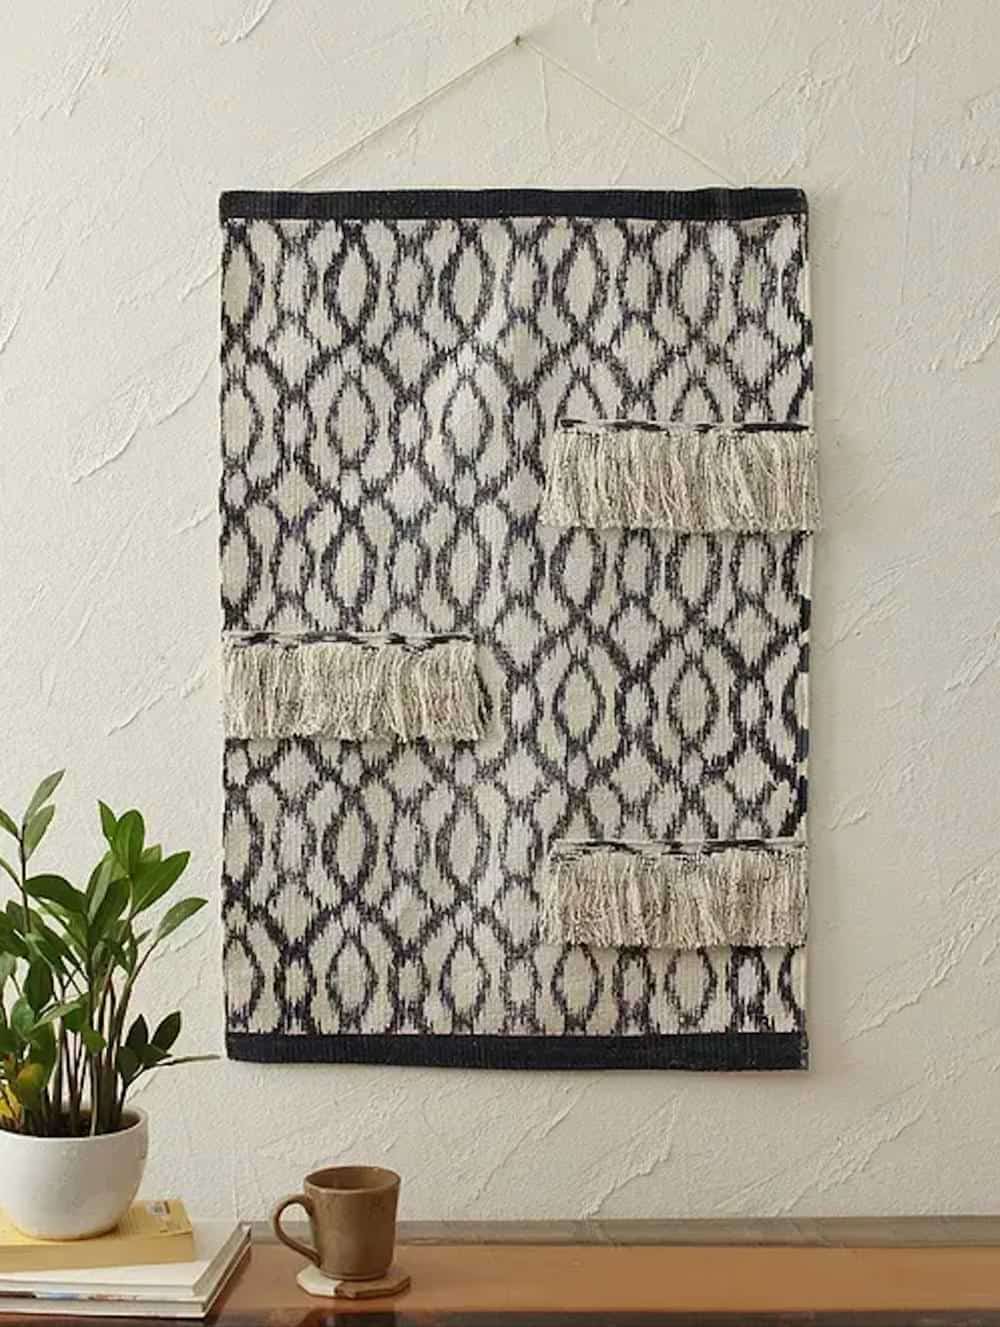 Wall tapestry with indie print and tassles